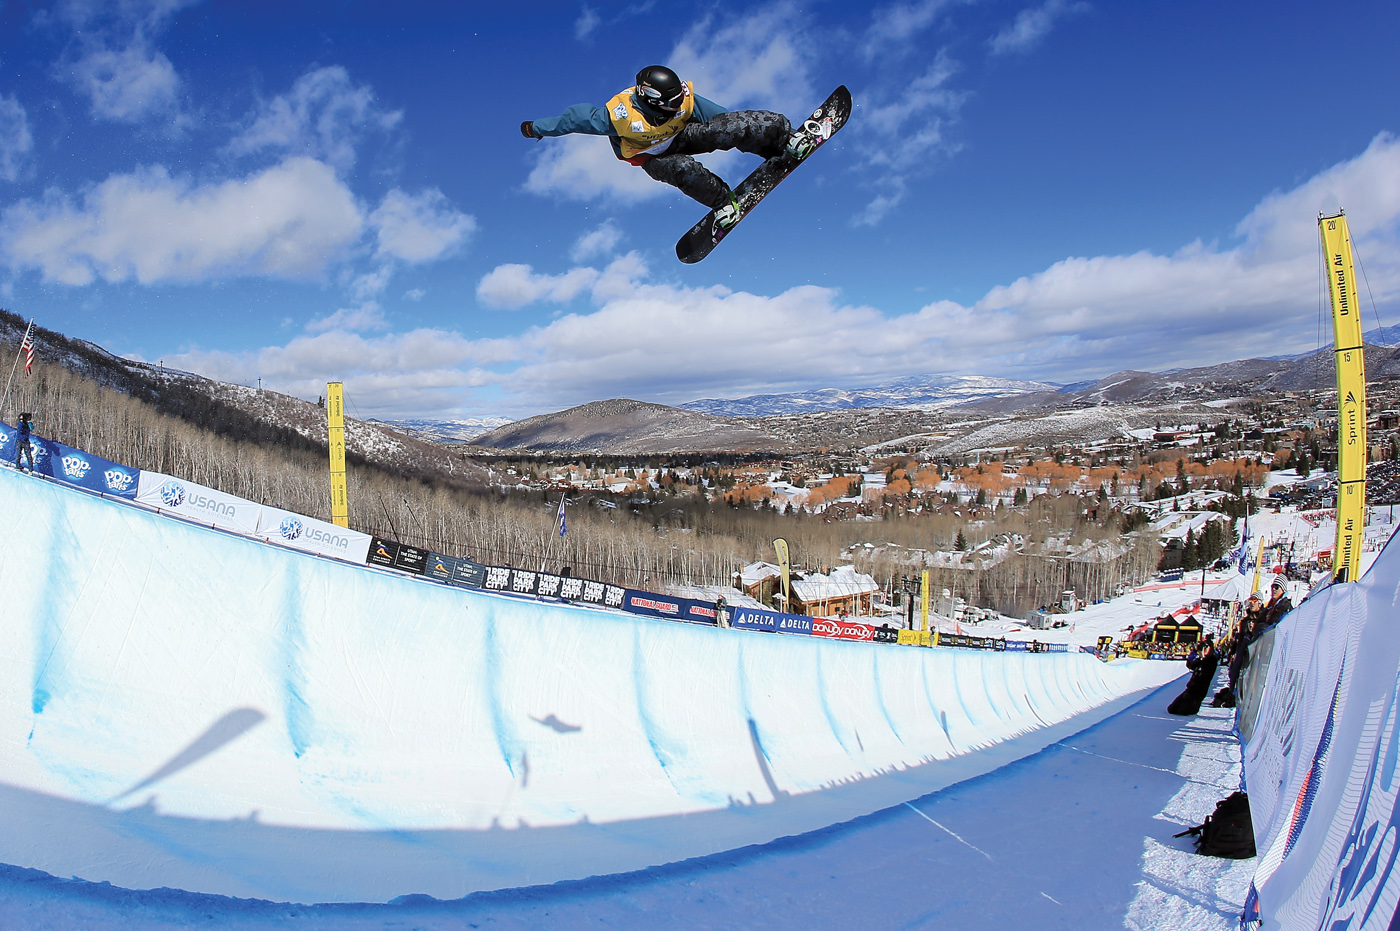 Great Britain’s Ben Kilner flies over the halfpipe at the FIS Snowboard Halfpipe World Cup staged at Park City Mountain Resort in February.